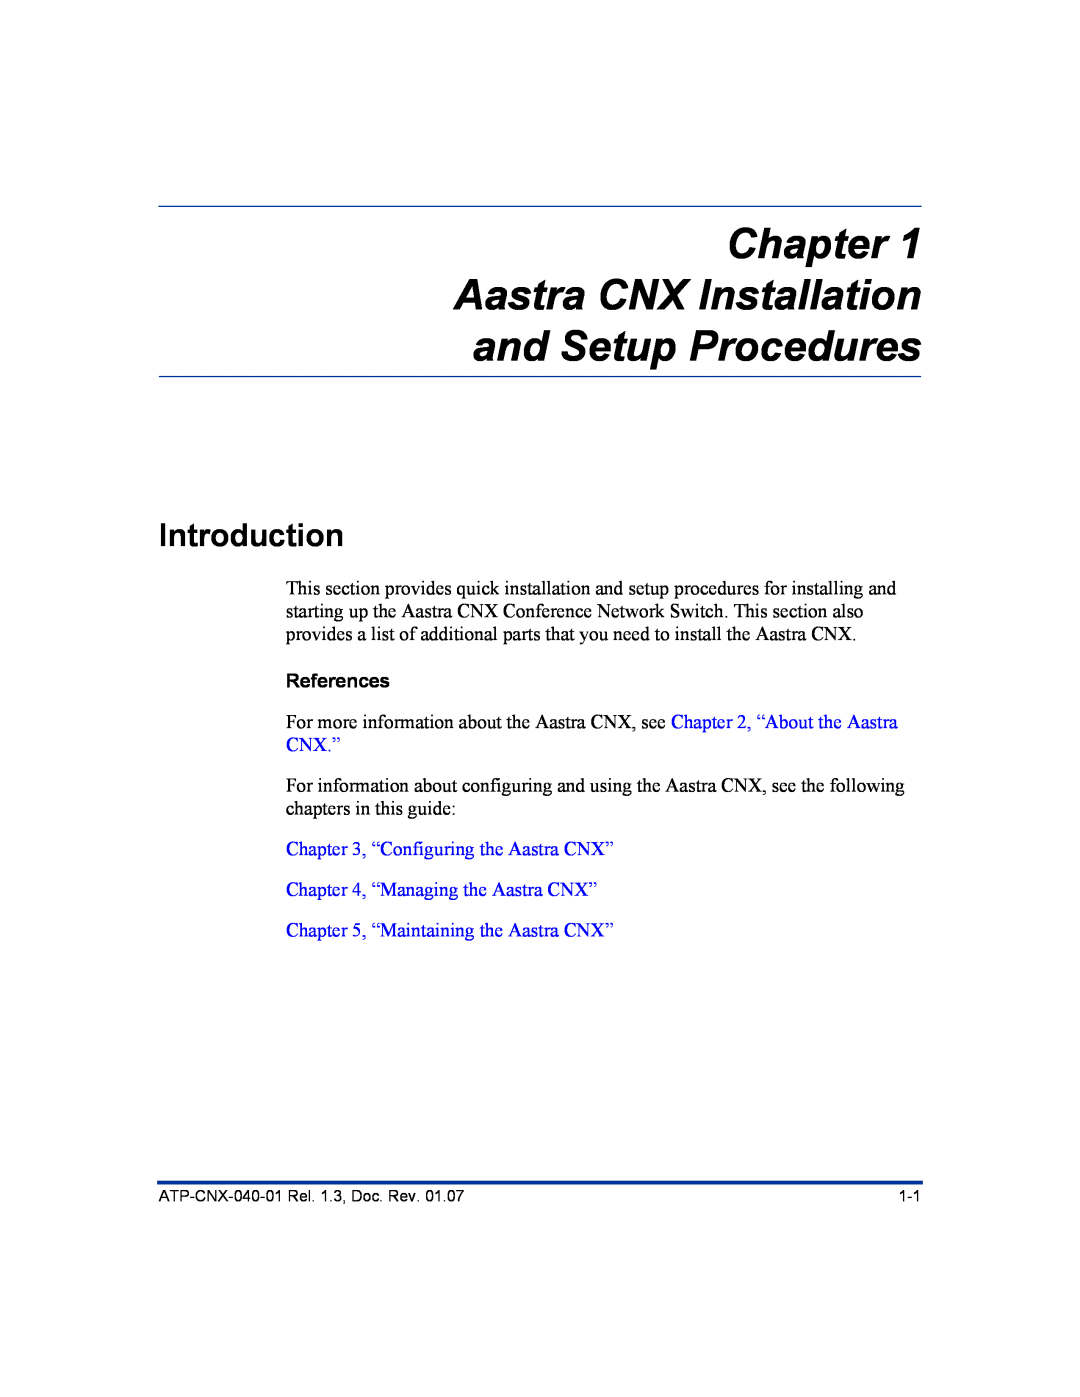 Aastra Telecom ATP-CNX-040-01 manual Chapter Aastra CNX Installation and Setup Procedures, Introduction, References 